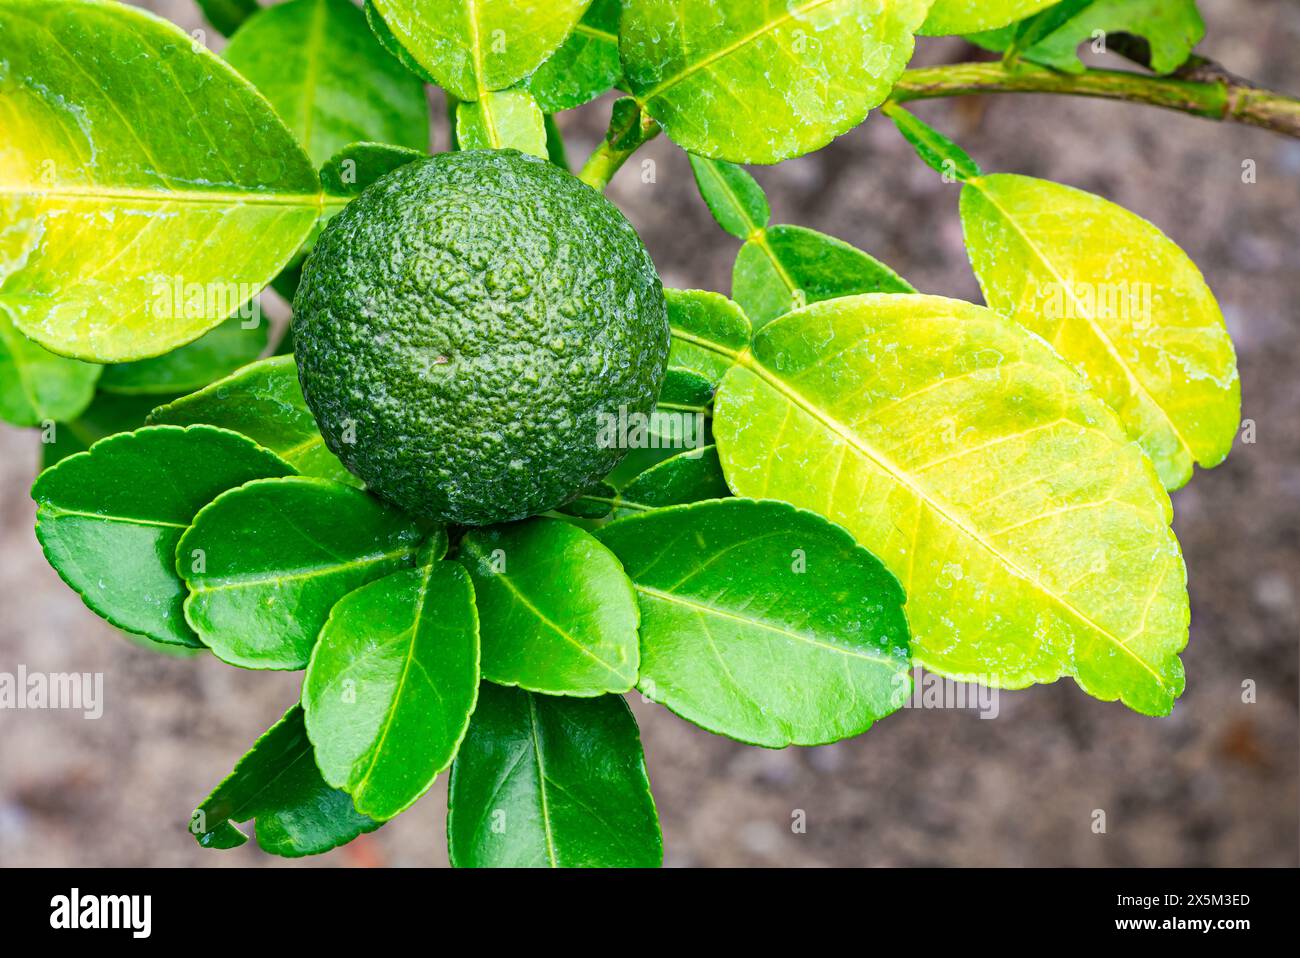 Closeup view of Green Bitter Orange (Citrus aurantium) with green leaves in the tree. Stock Photo